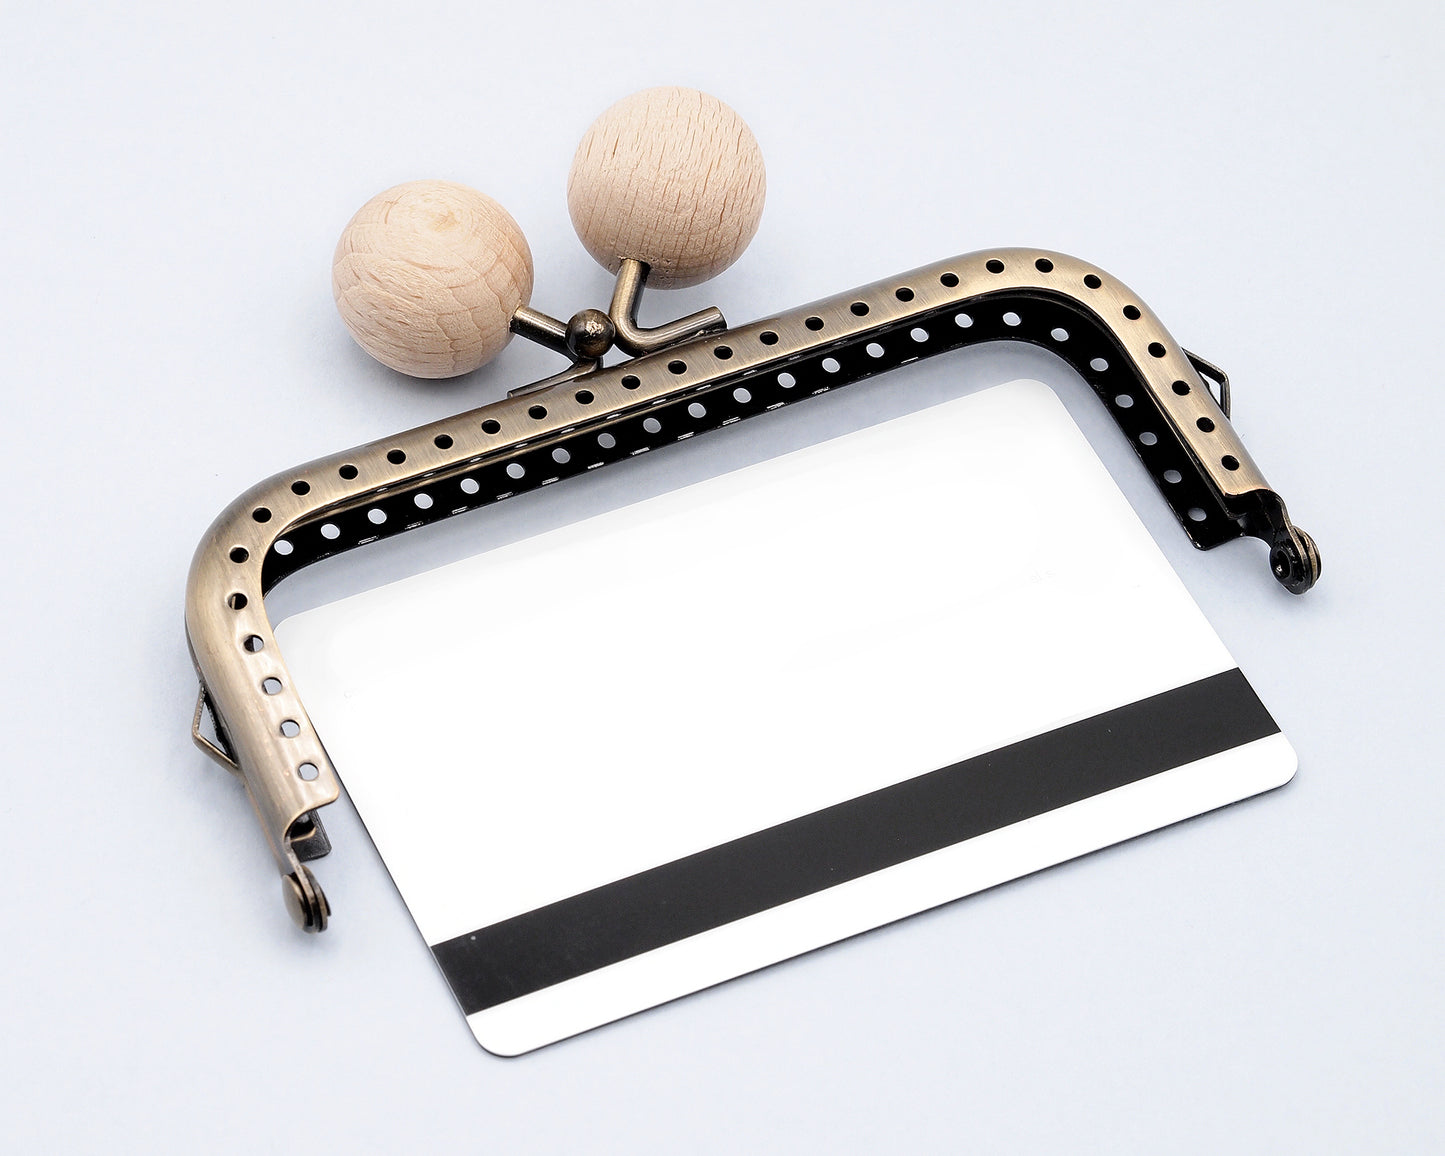 10.5cm. purse frame with natural wooden balls